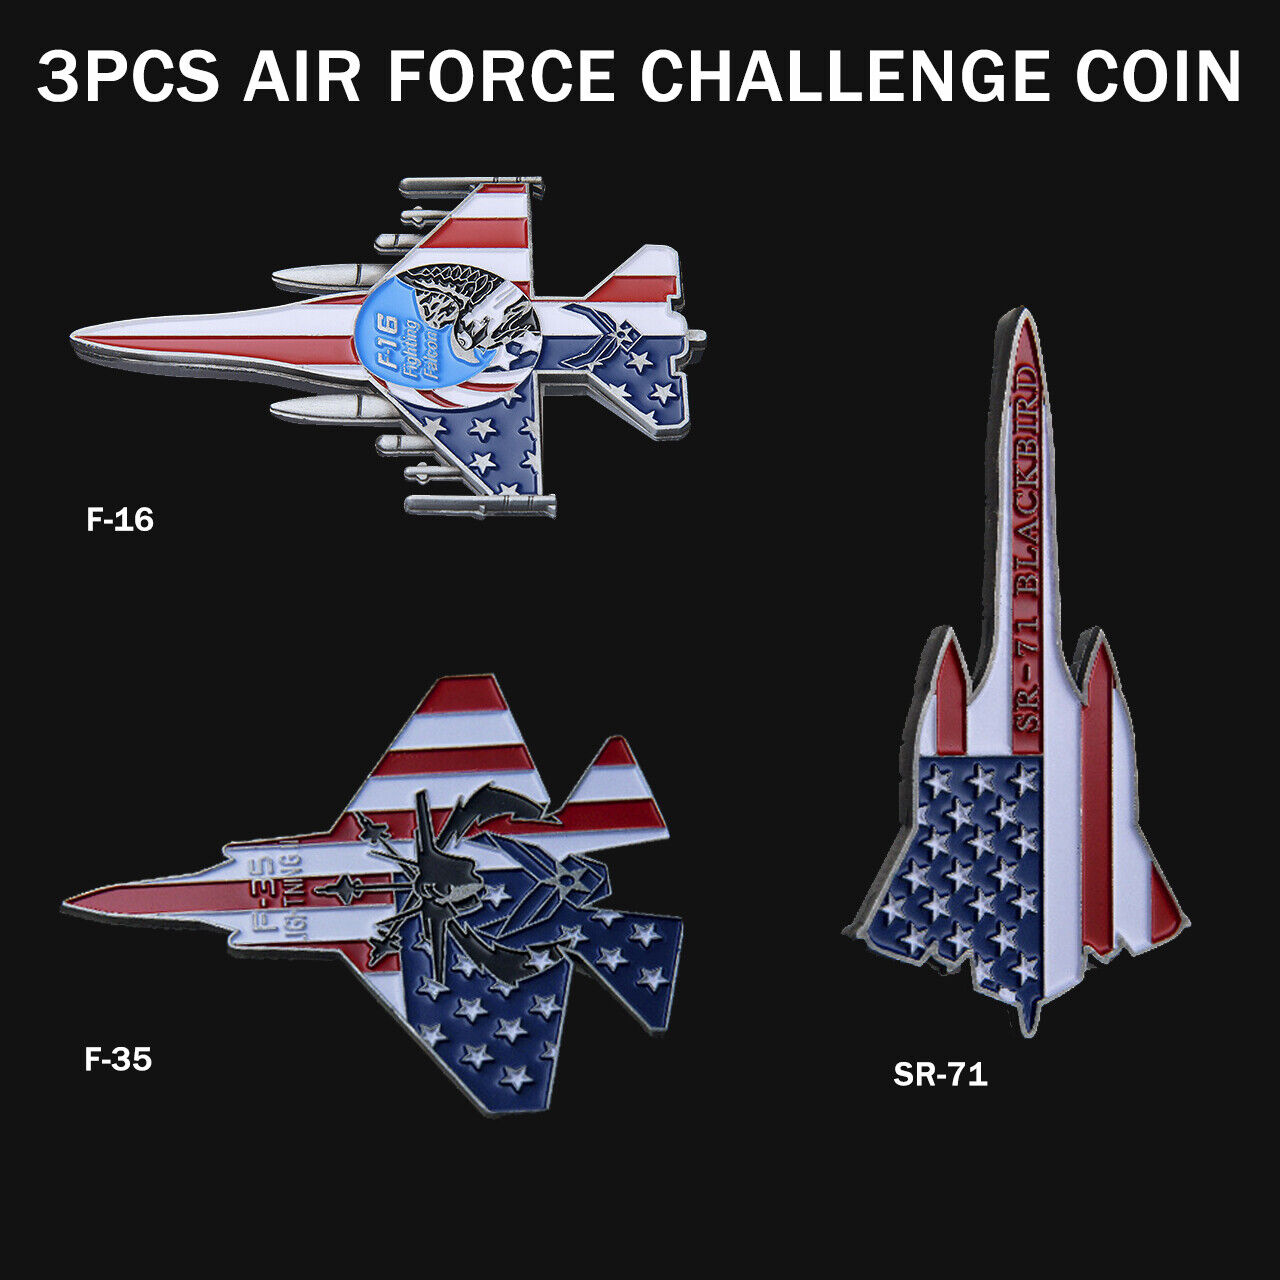 3 X US Air Force F-16 F-35 SR-71 Commemorative Challenge Coin Collection Gift